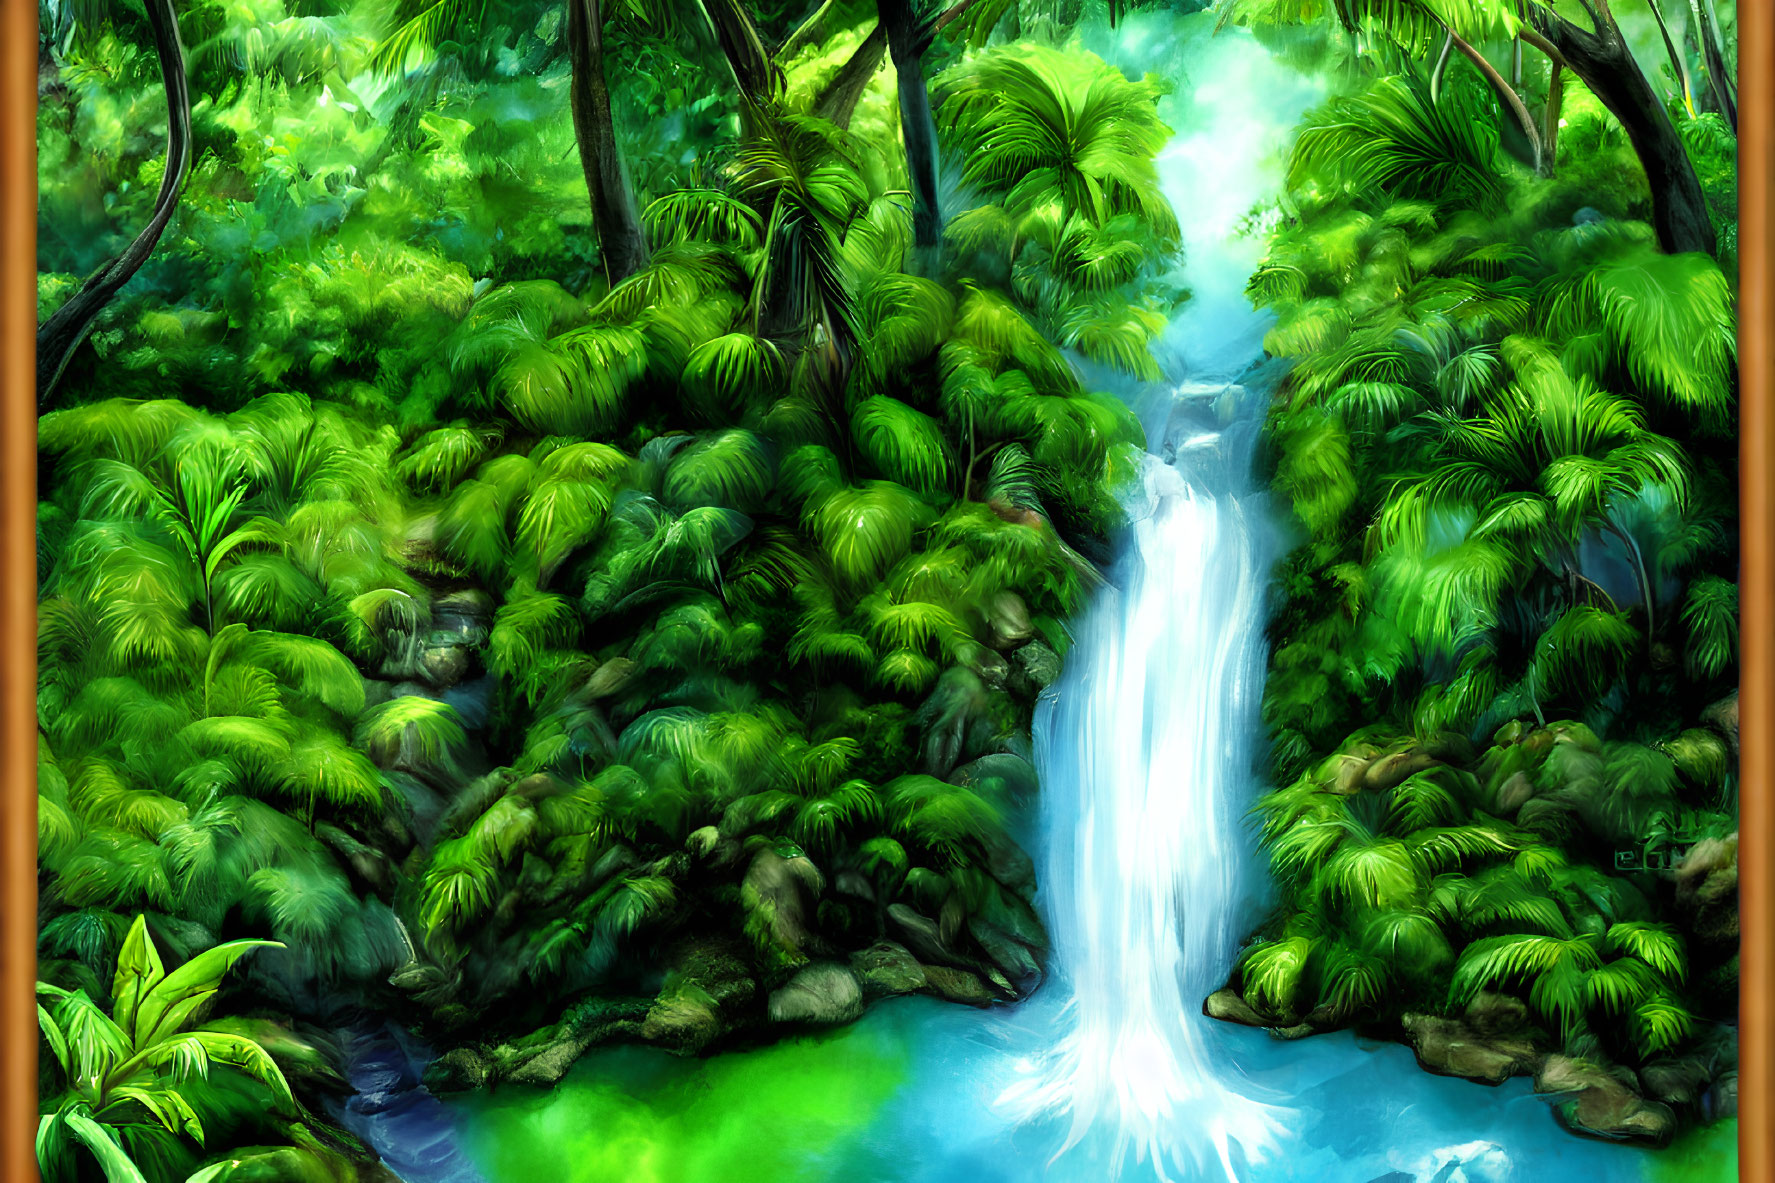 Tropical waterfall illustration with lush green foliage